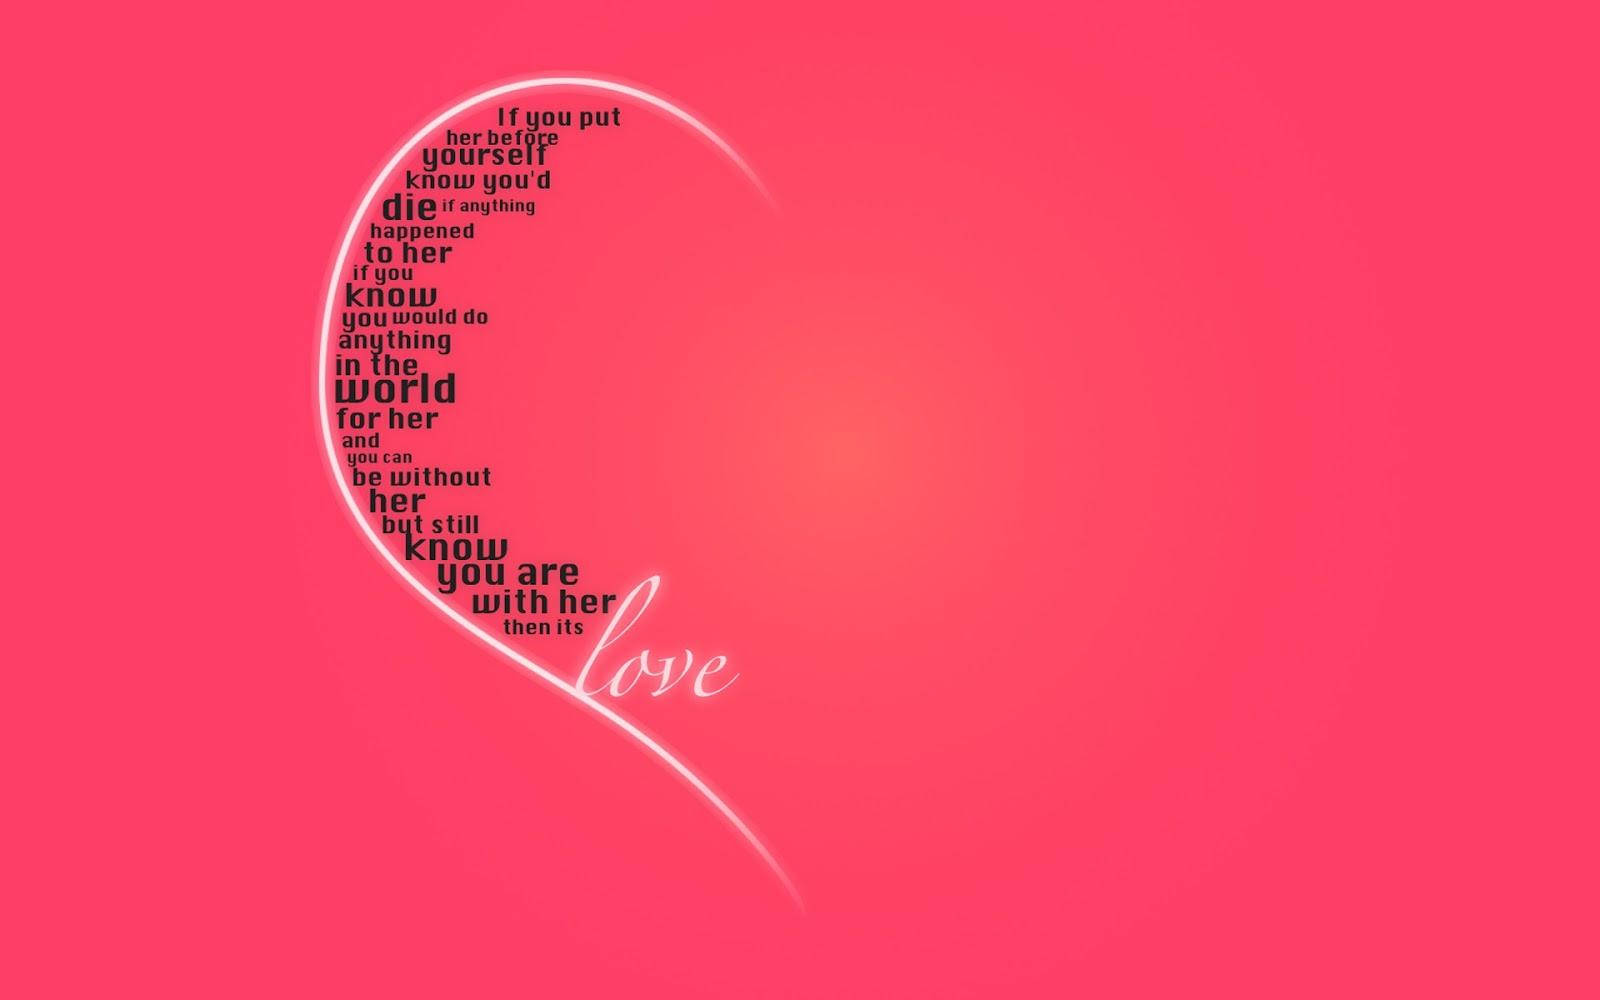 Free Love Quotes Wallpaper Downloads, [200+] Love Quotes Wallpapers for FREE  